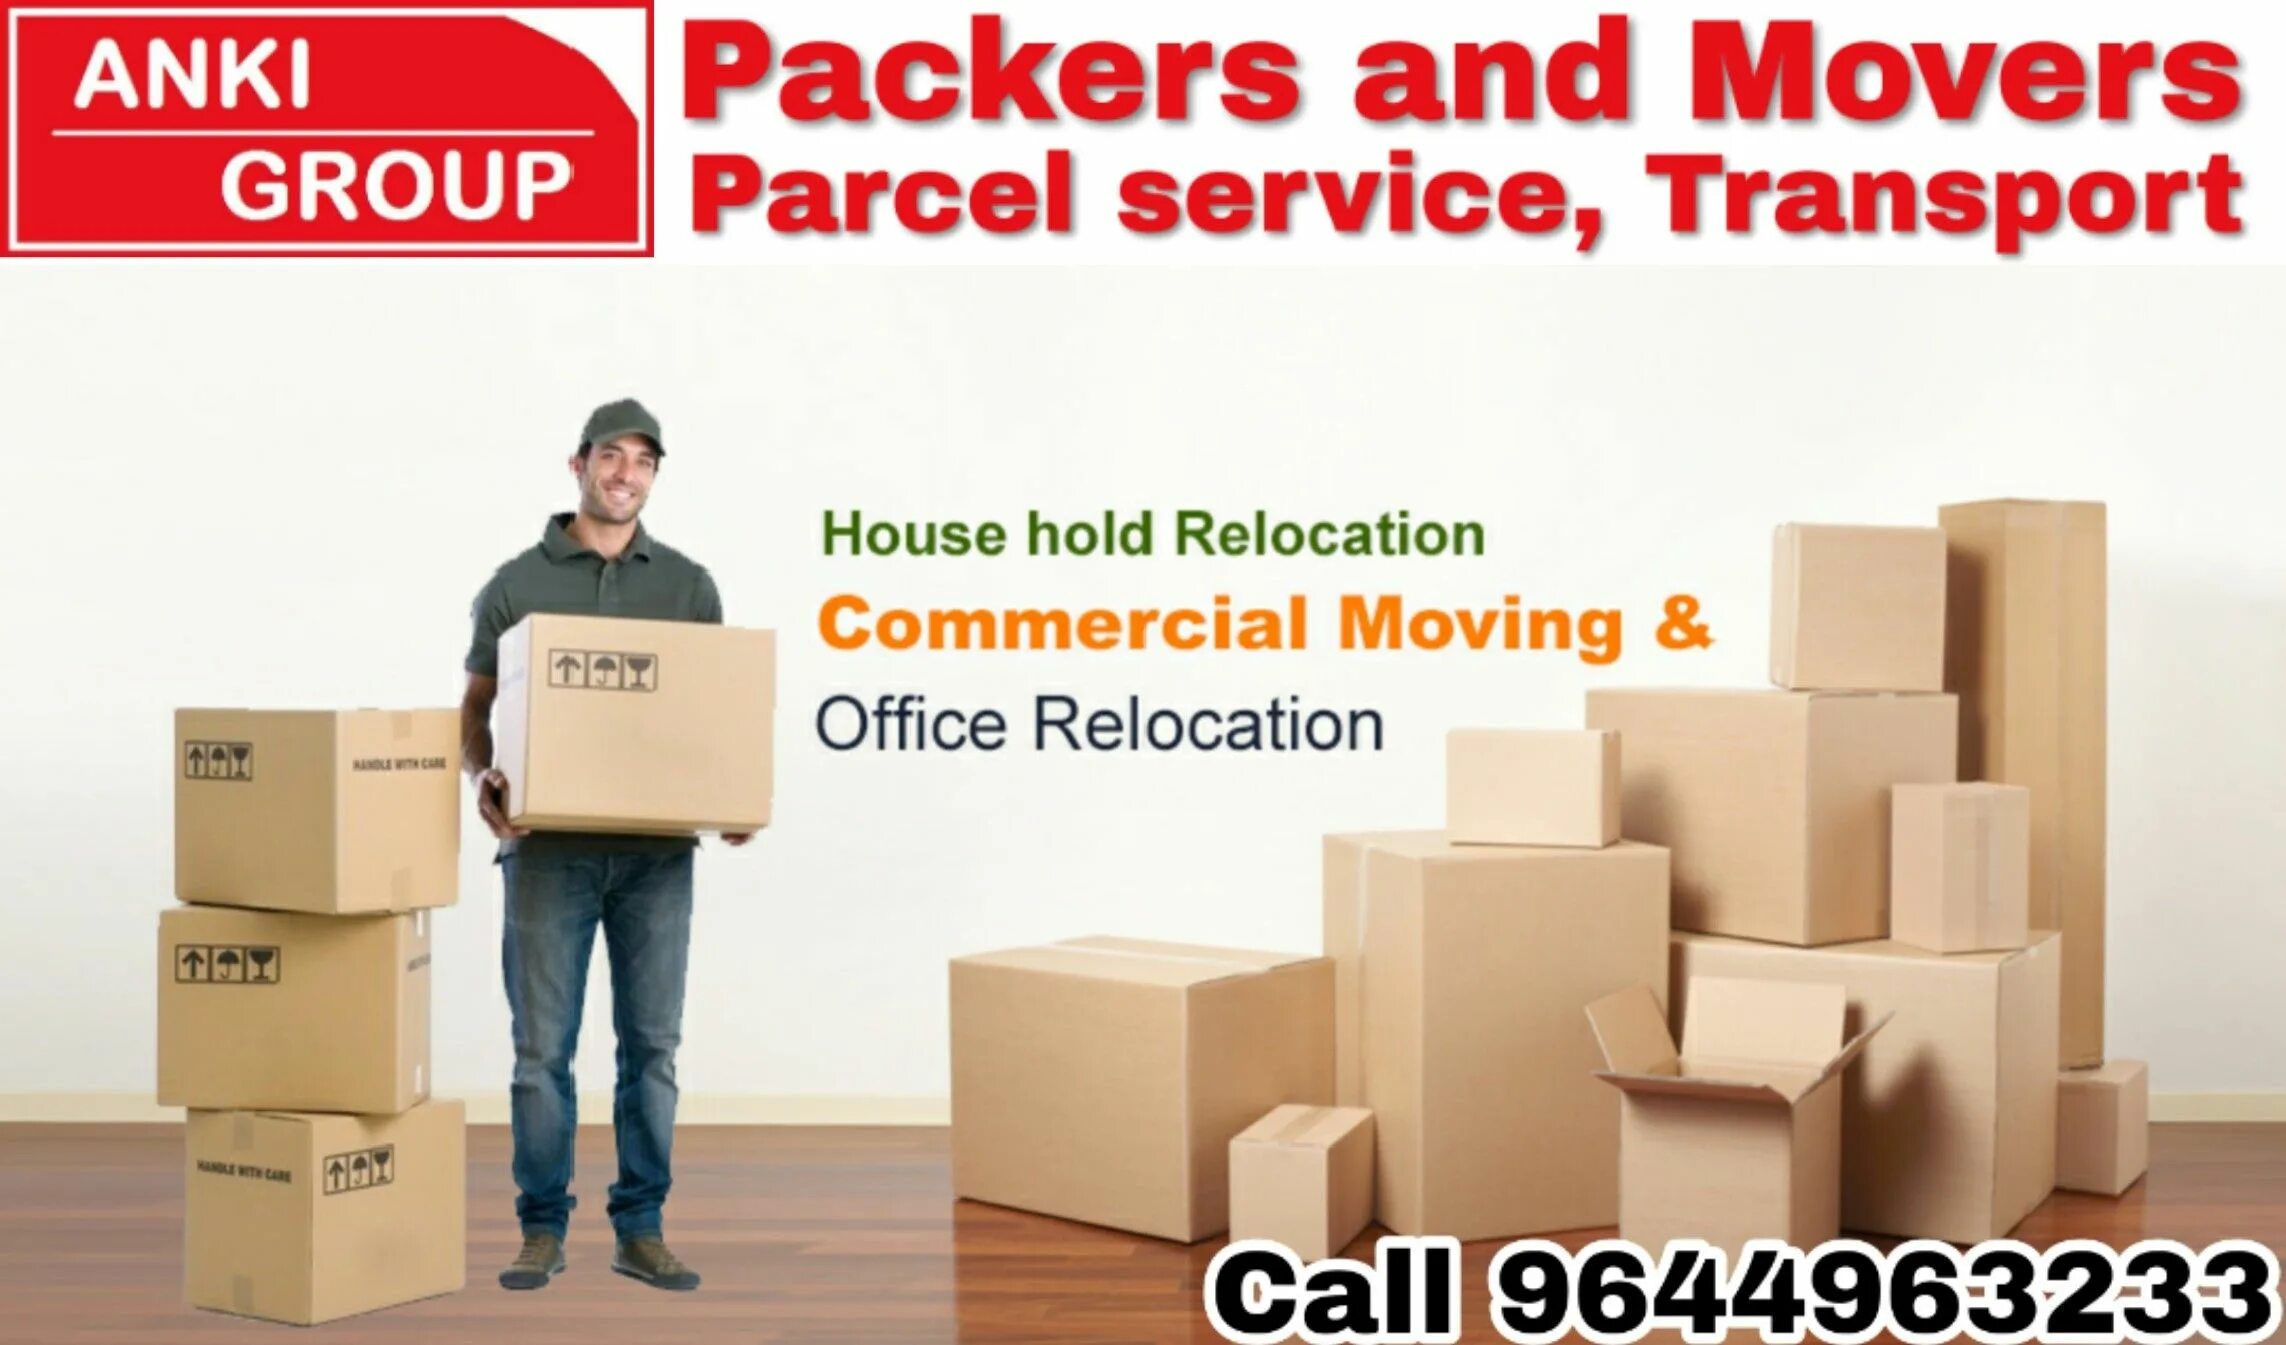 Move package. House shifting services. Relocation. Go Movers. Moving goods.